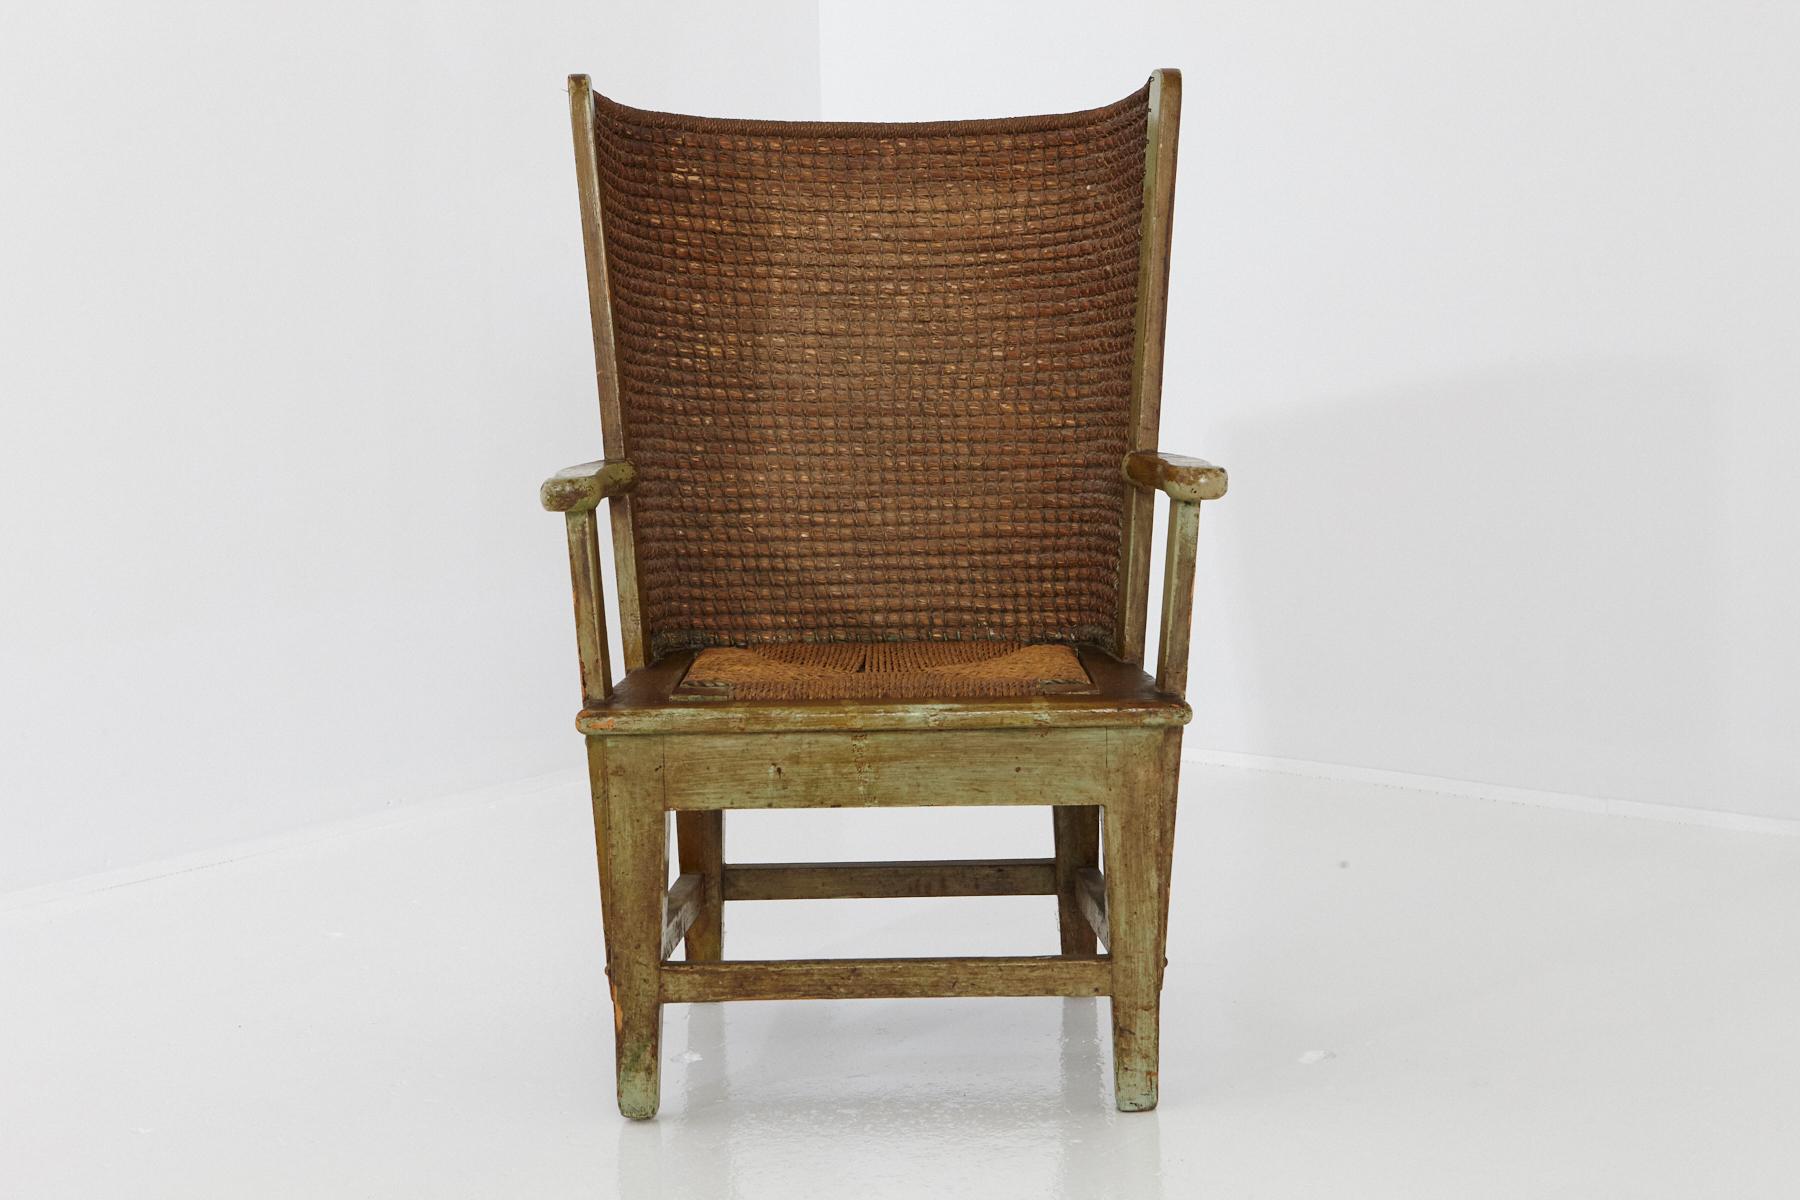 Late 19th-century child's armchair or fauteuil from the Scottish Orkney Islands, also referred to as Orkney Chair.
The Orkney chair features an oak frame supporting a demicircle back in the style of wingback chairs, handwoven with straw. 
The wooden